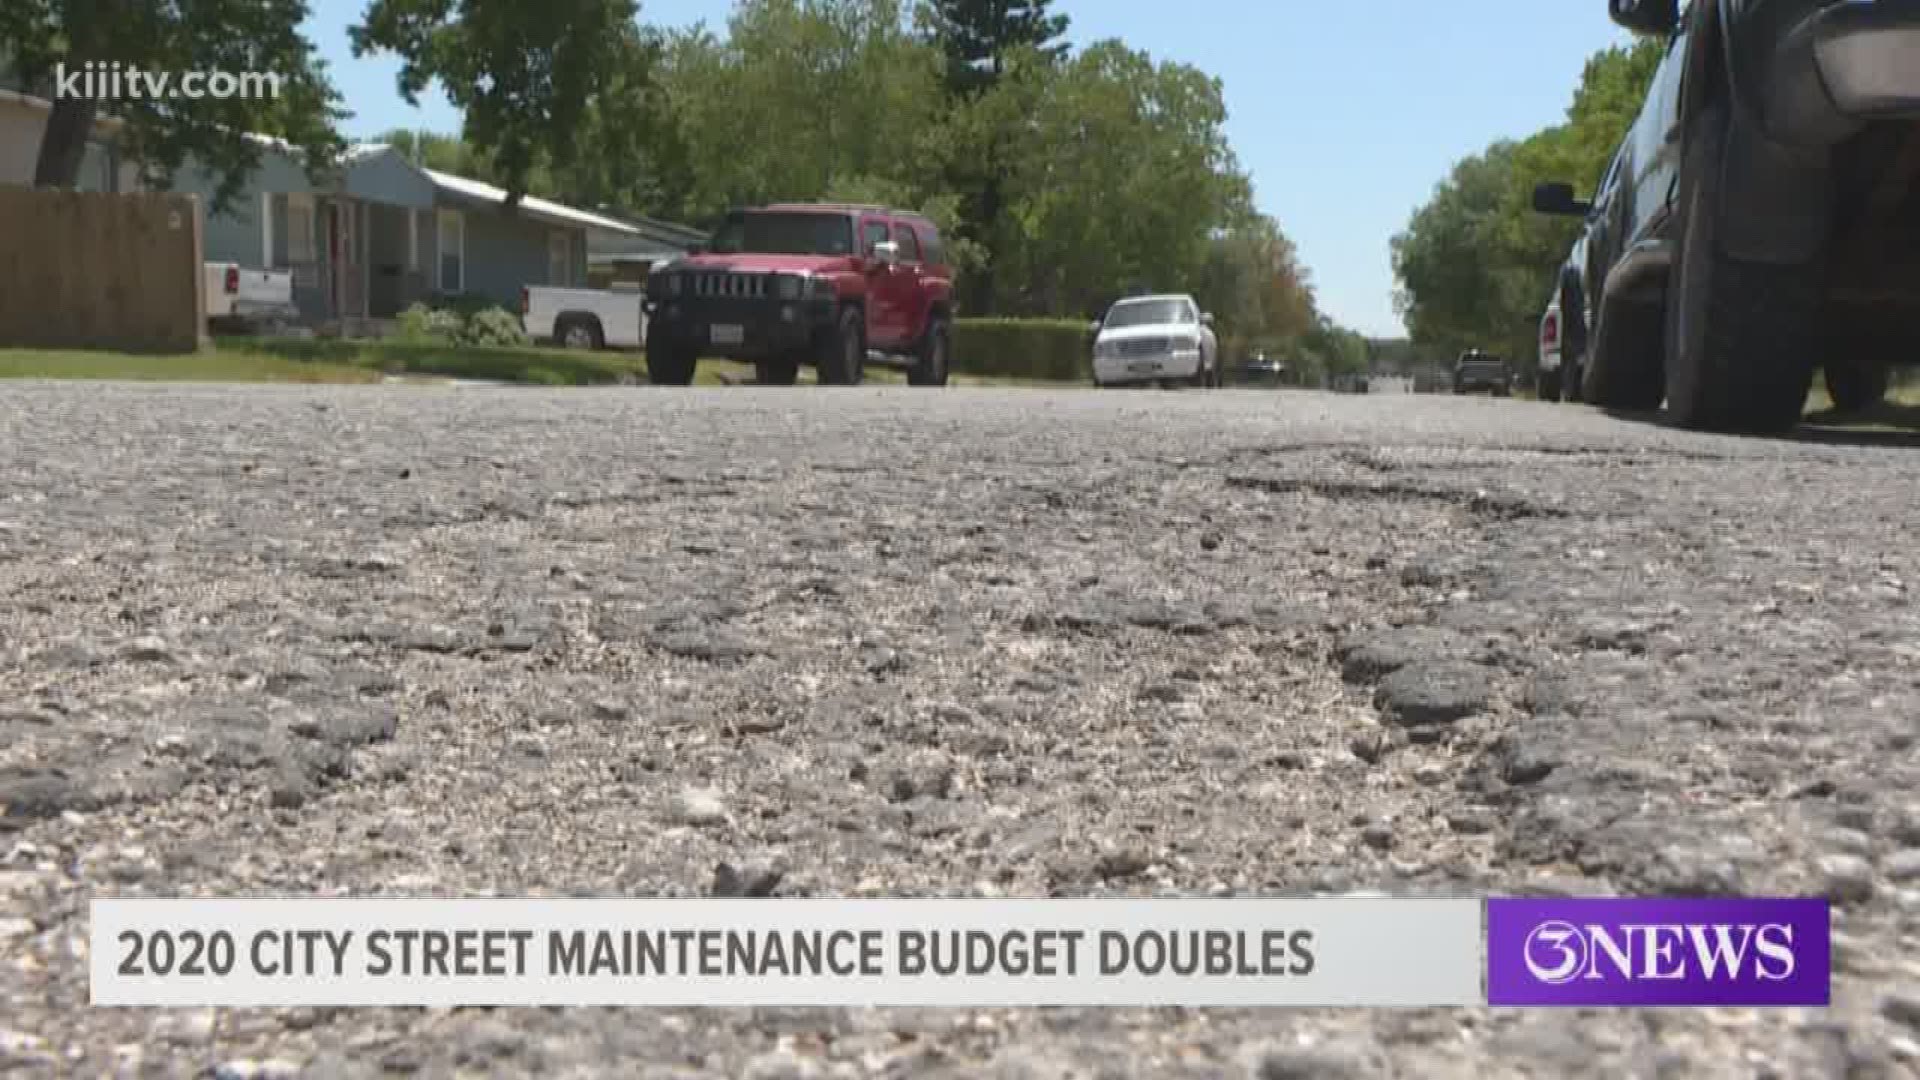 Next year's proposed $1.1 billion budget for the City of Corpus Christi includes a whopping $128 million for street maintenance and reconstruction -- double what was allocated for streets under the current budget.

There's a big focus on residential areas this time around, with a list of projects stretching from Calallen to Corpus Christi's southside, and everywhere in between. The residential street fund is $25 million -- basically a four-percent property tax approved by voters.